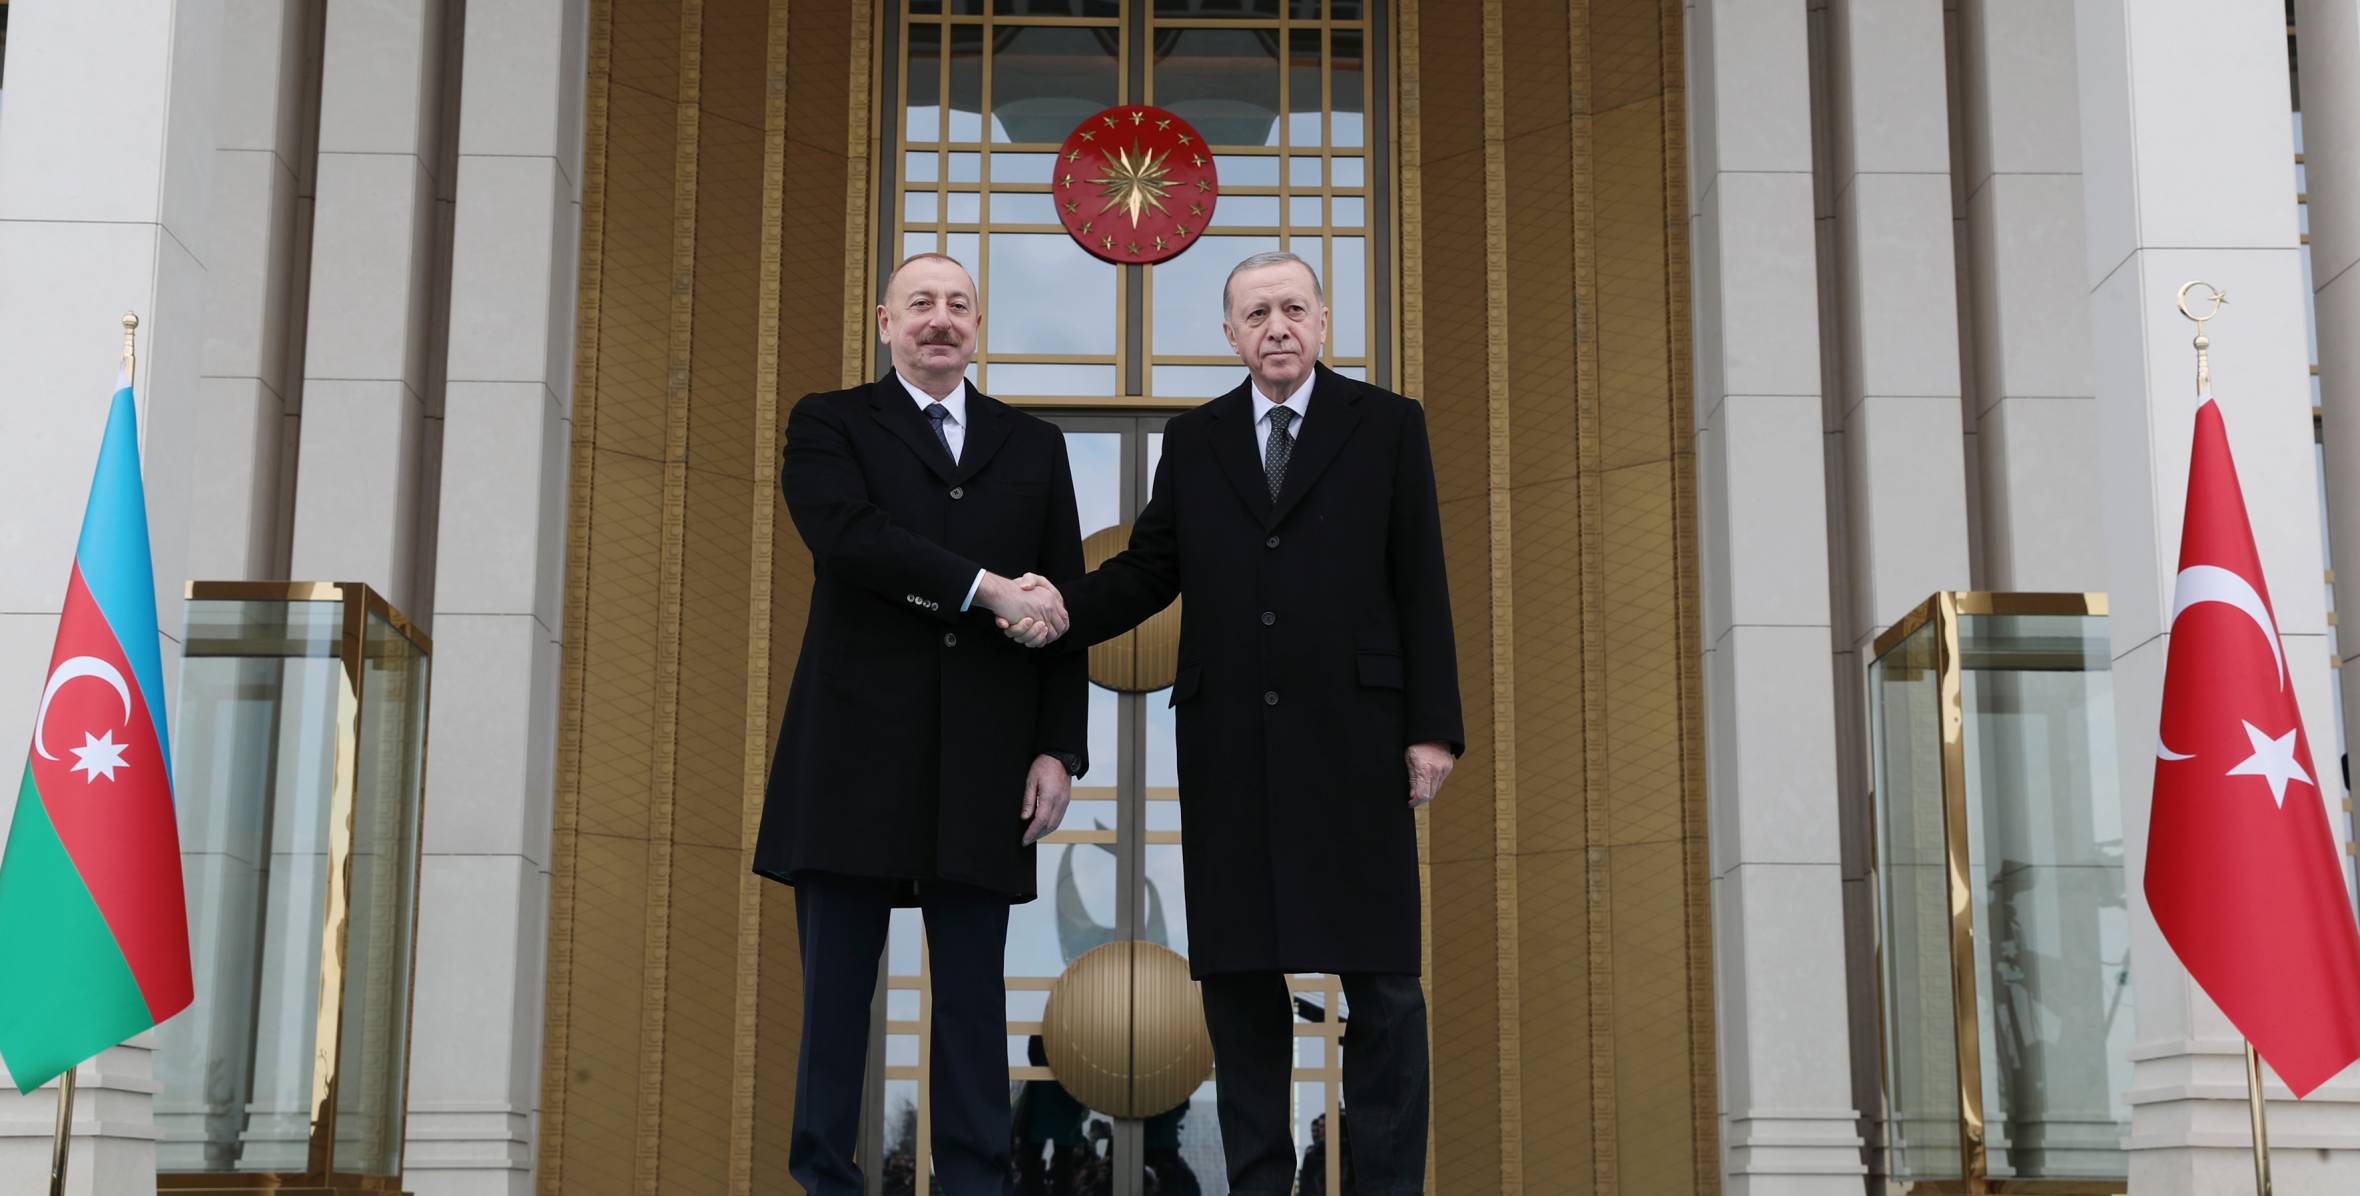 An official welcome ceremony for Ilham Aliyev has been held at the Presidential Palace of the Republic of Türkiye